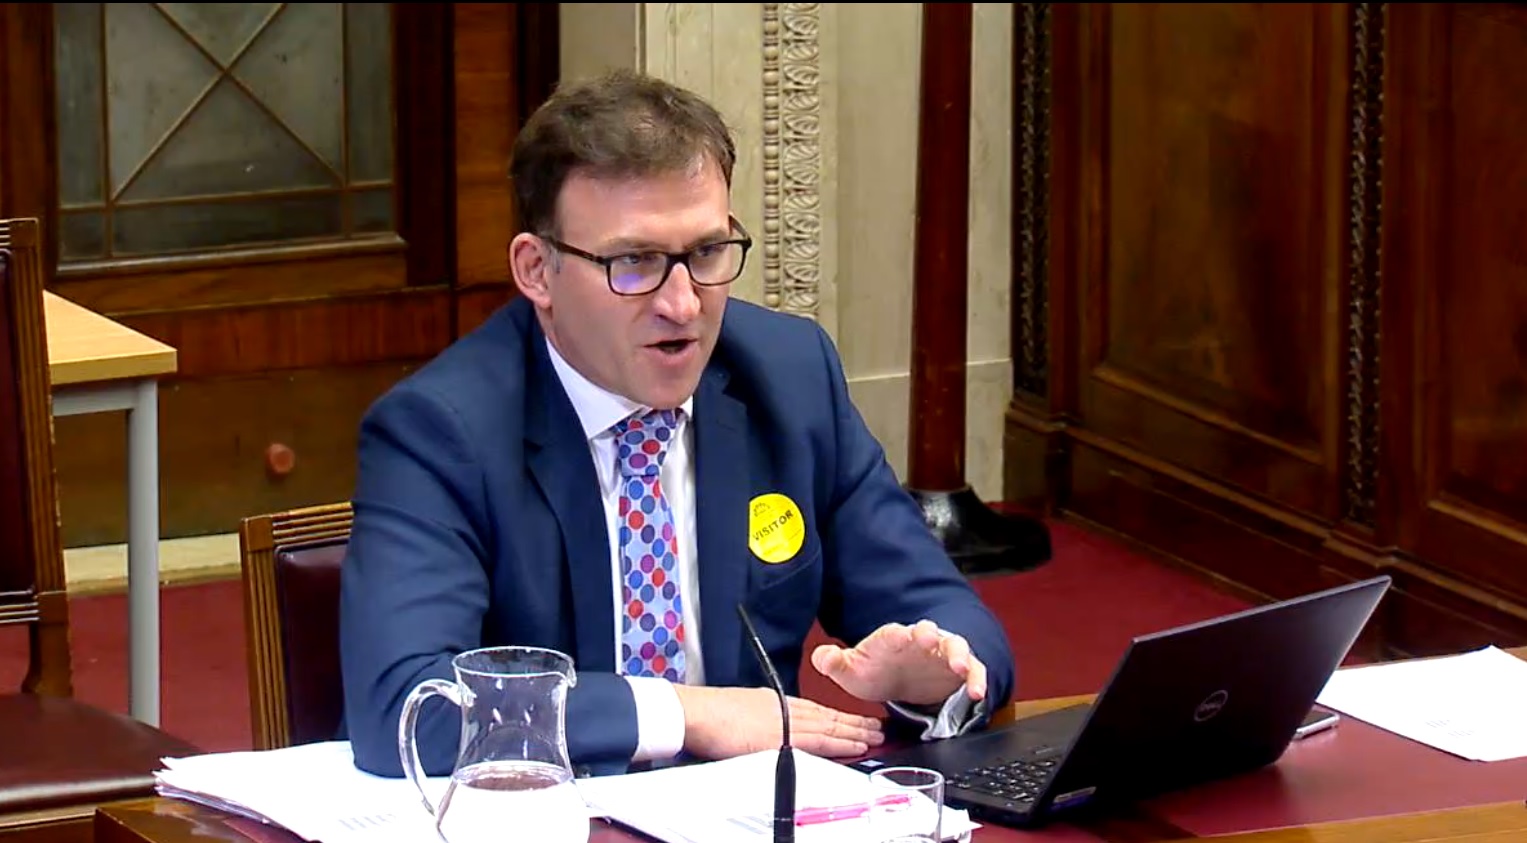 CCEA chief executive Justin Edwards gives evidence to the education committee